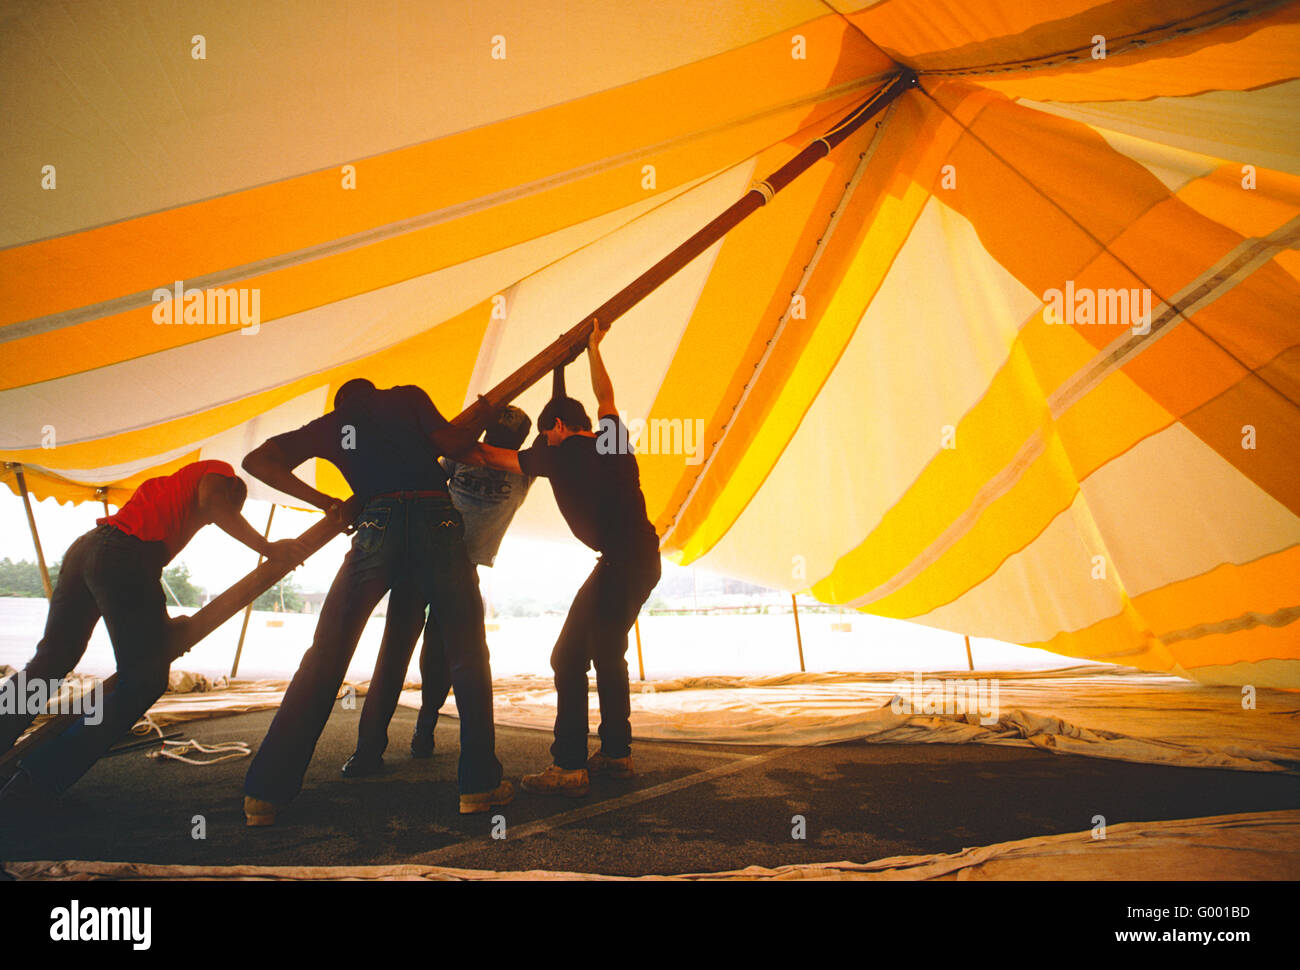 FOUR WORKERS STRUGGLE TO ERECT A LARGE YELLOW RENTAL TENT Stock Photo